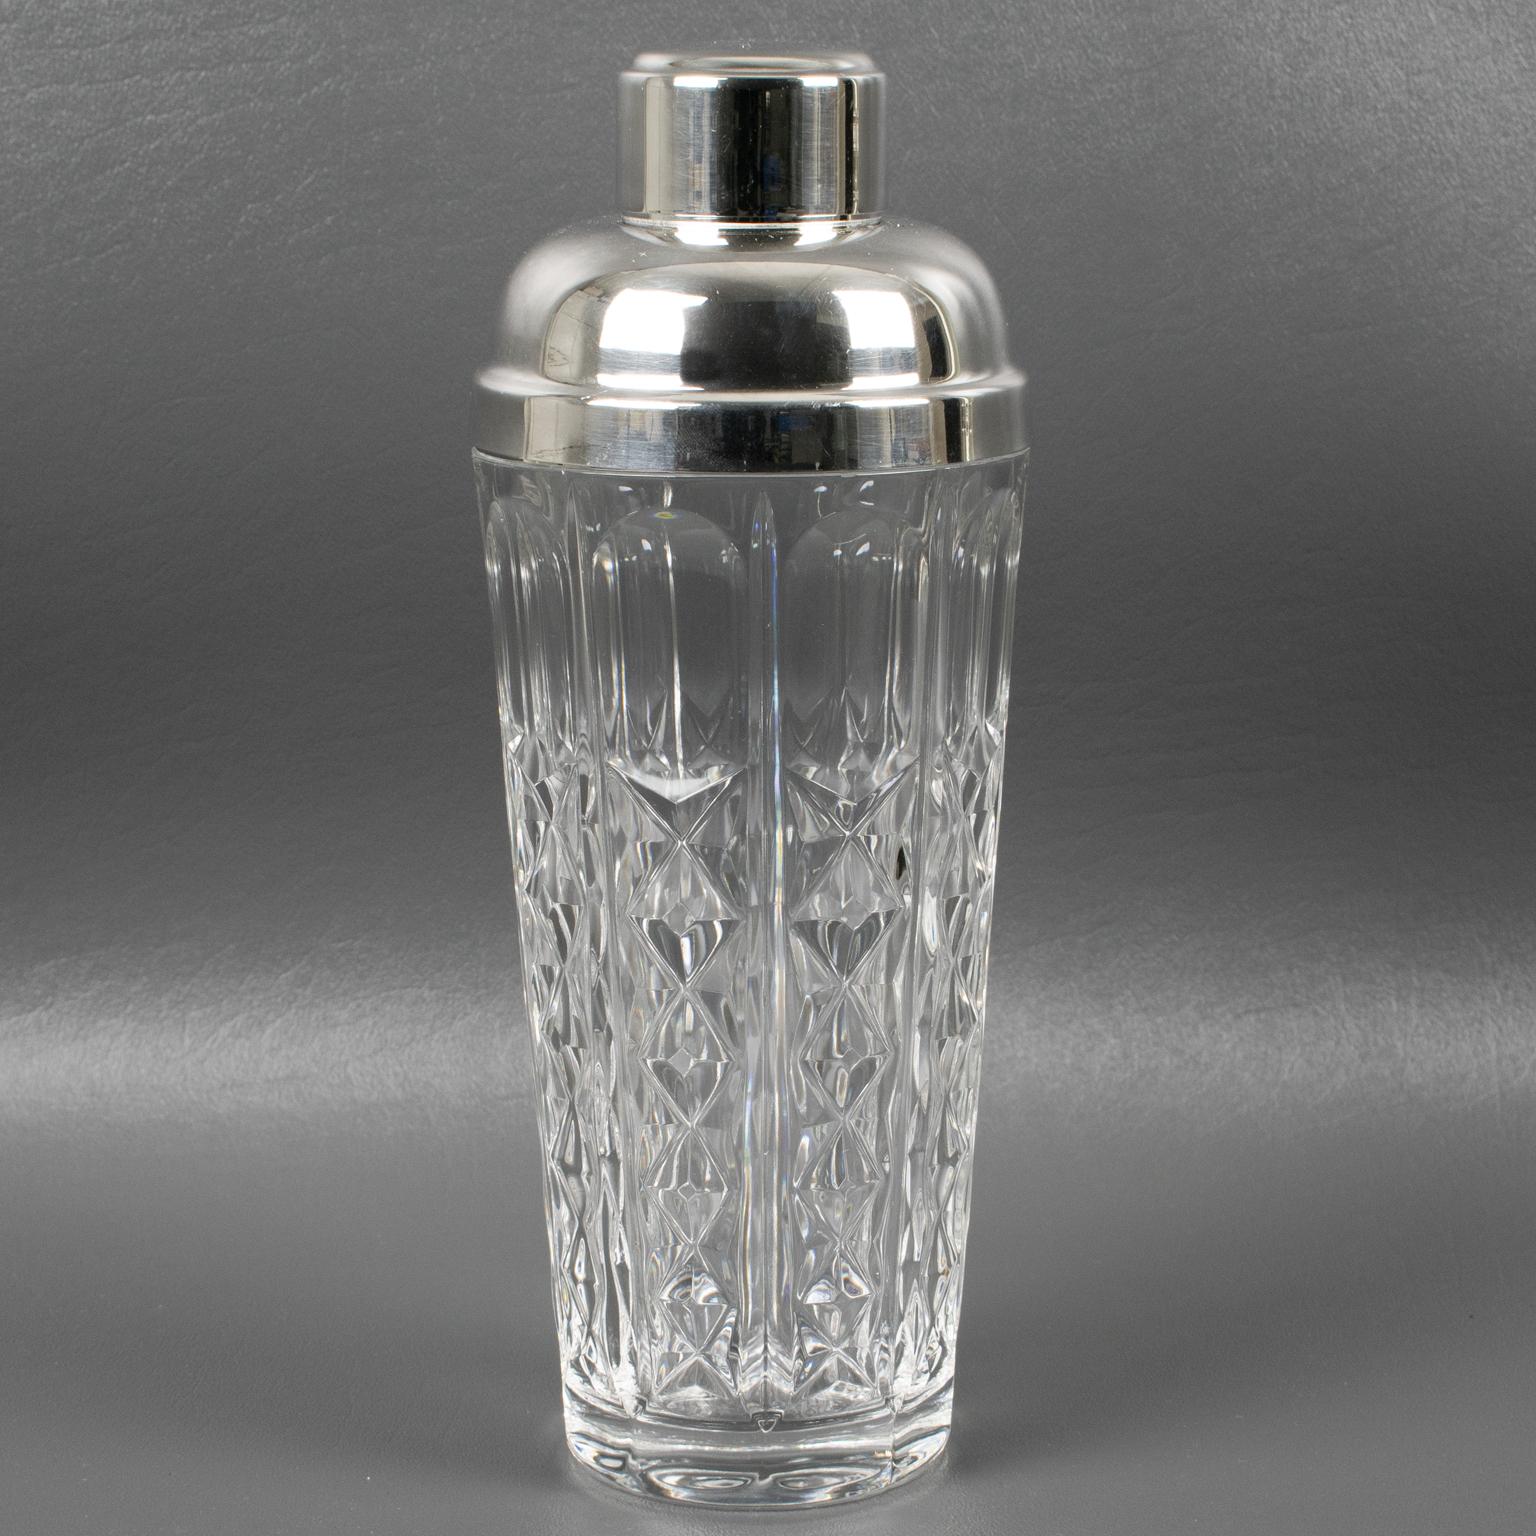 Italian Silver Plate and Crystal Cocktail Martini Shaker Barware by Towle, William Adams